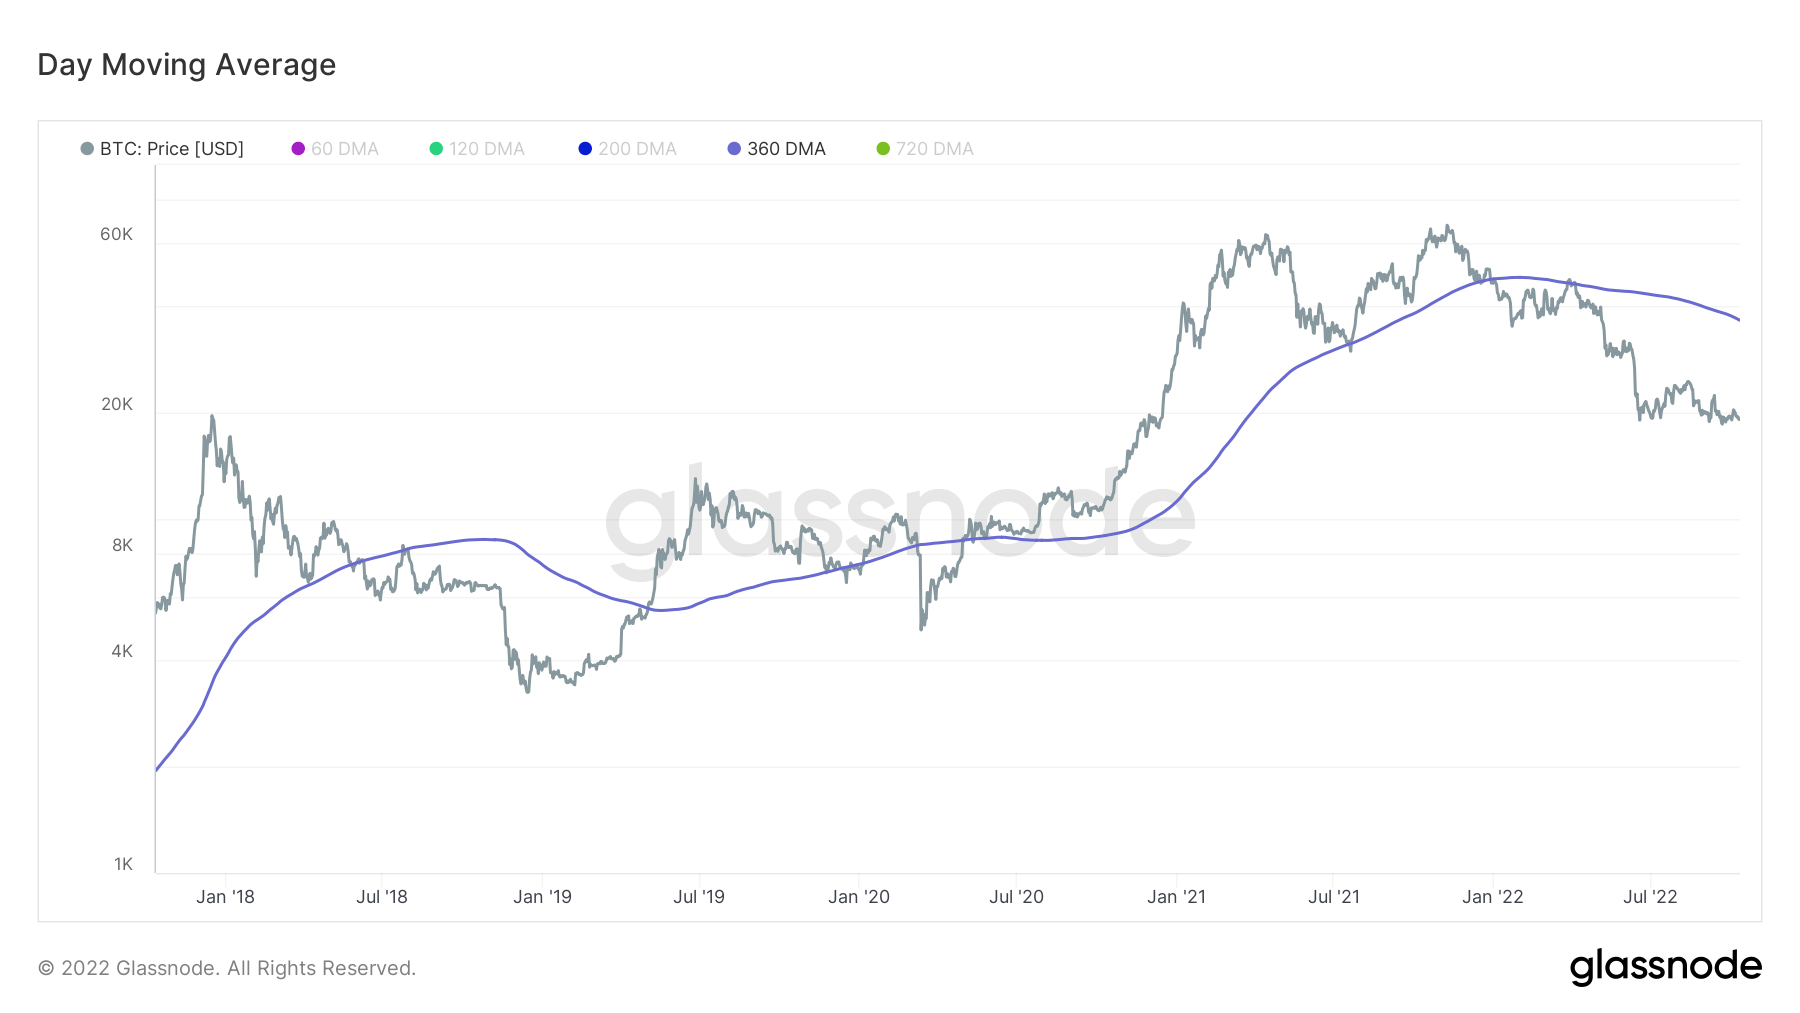 Bitcoin Day Moving Average (Source: Glassnode)